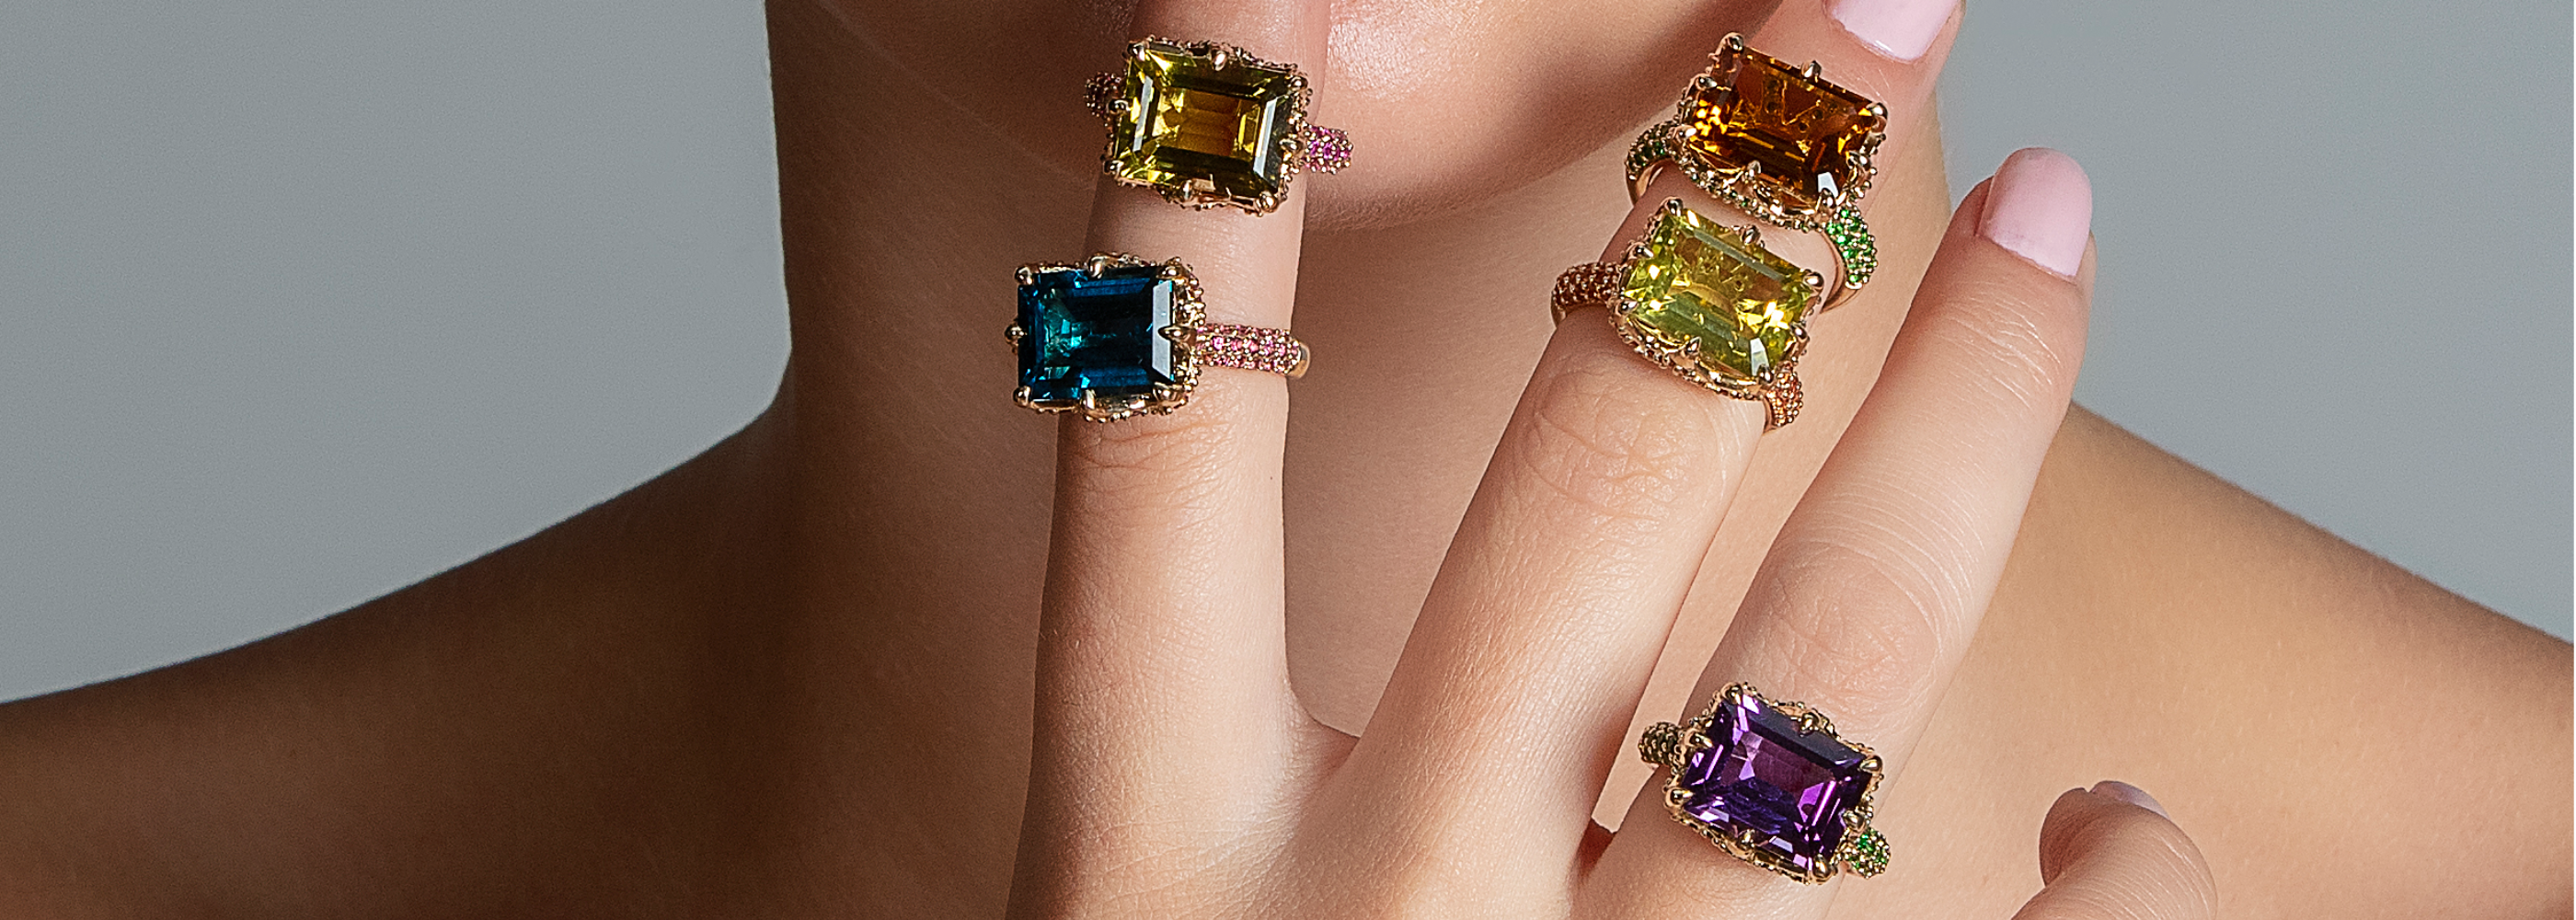 Shine All Season Long With Our New On the Rocks Collection